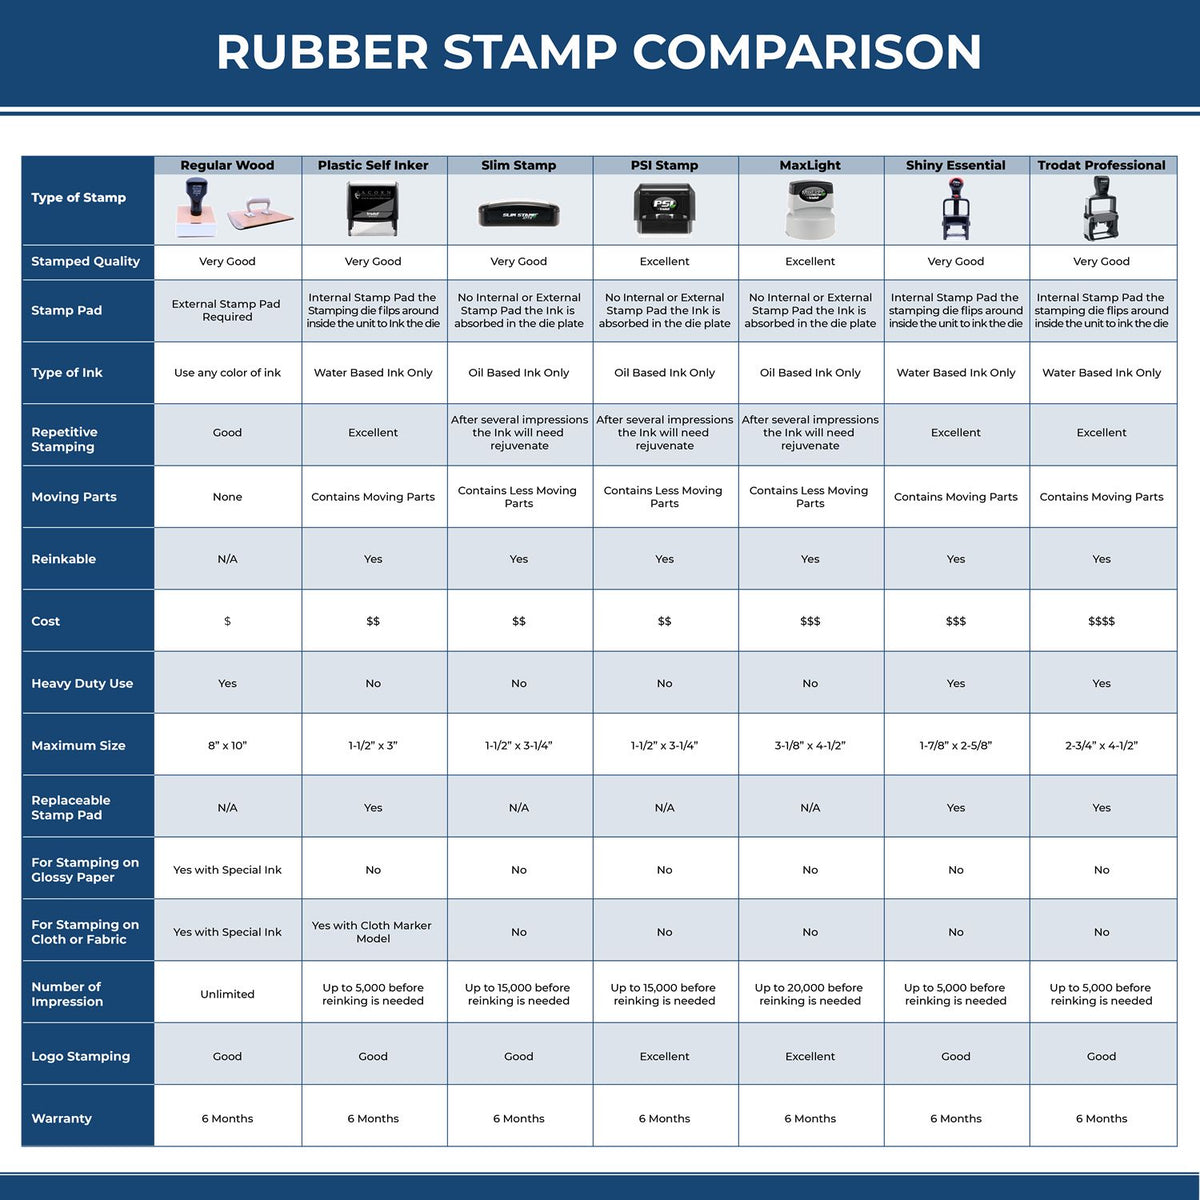 Large Self Inking Completed Stamp 4112S Rubber Stamp Comparison